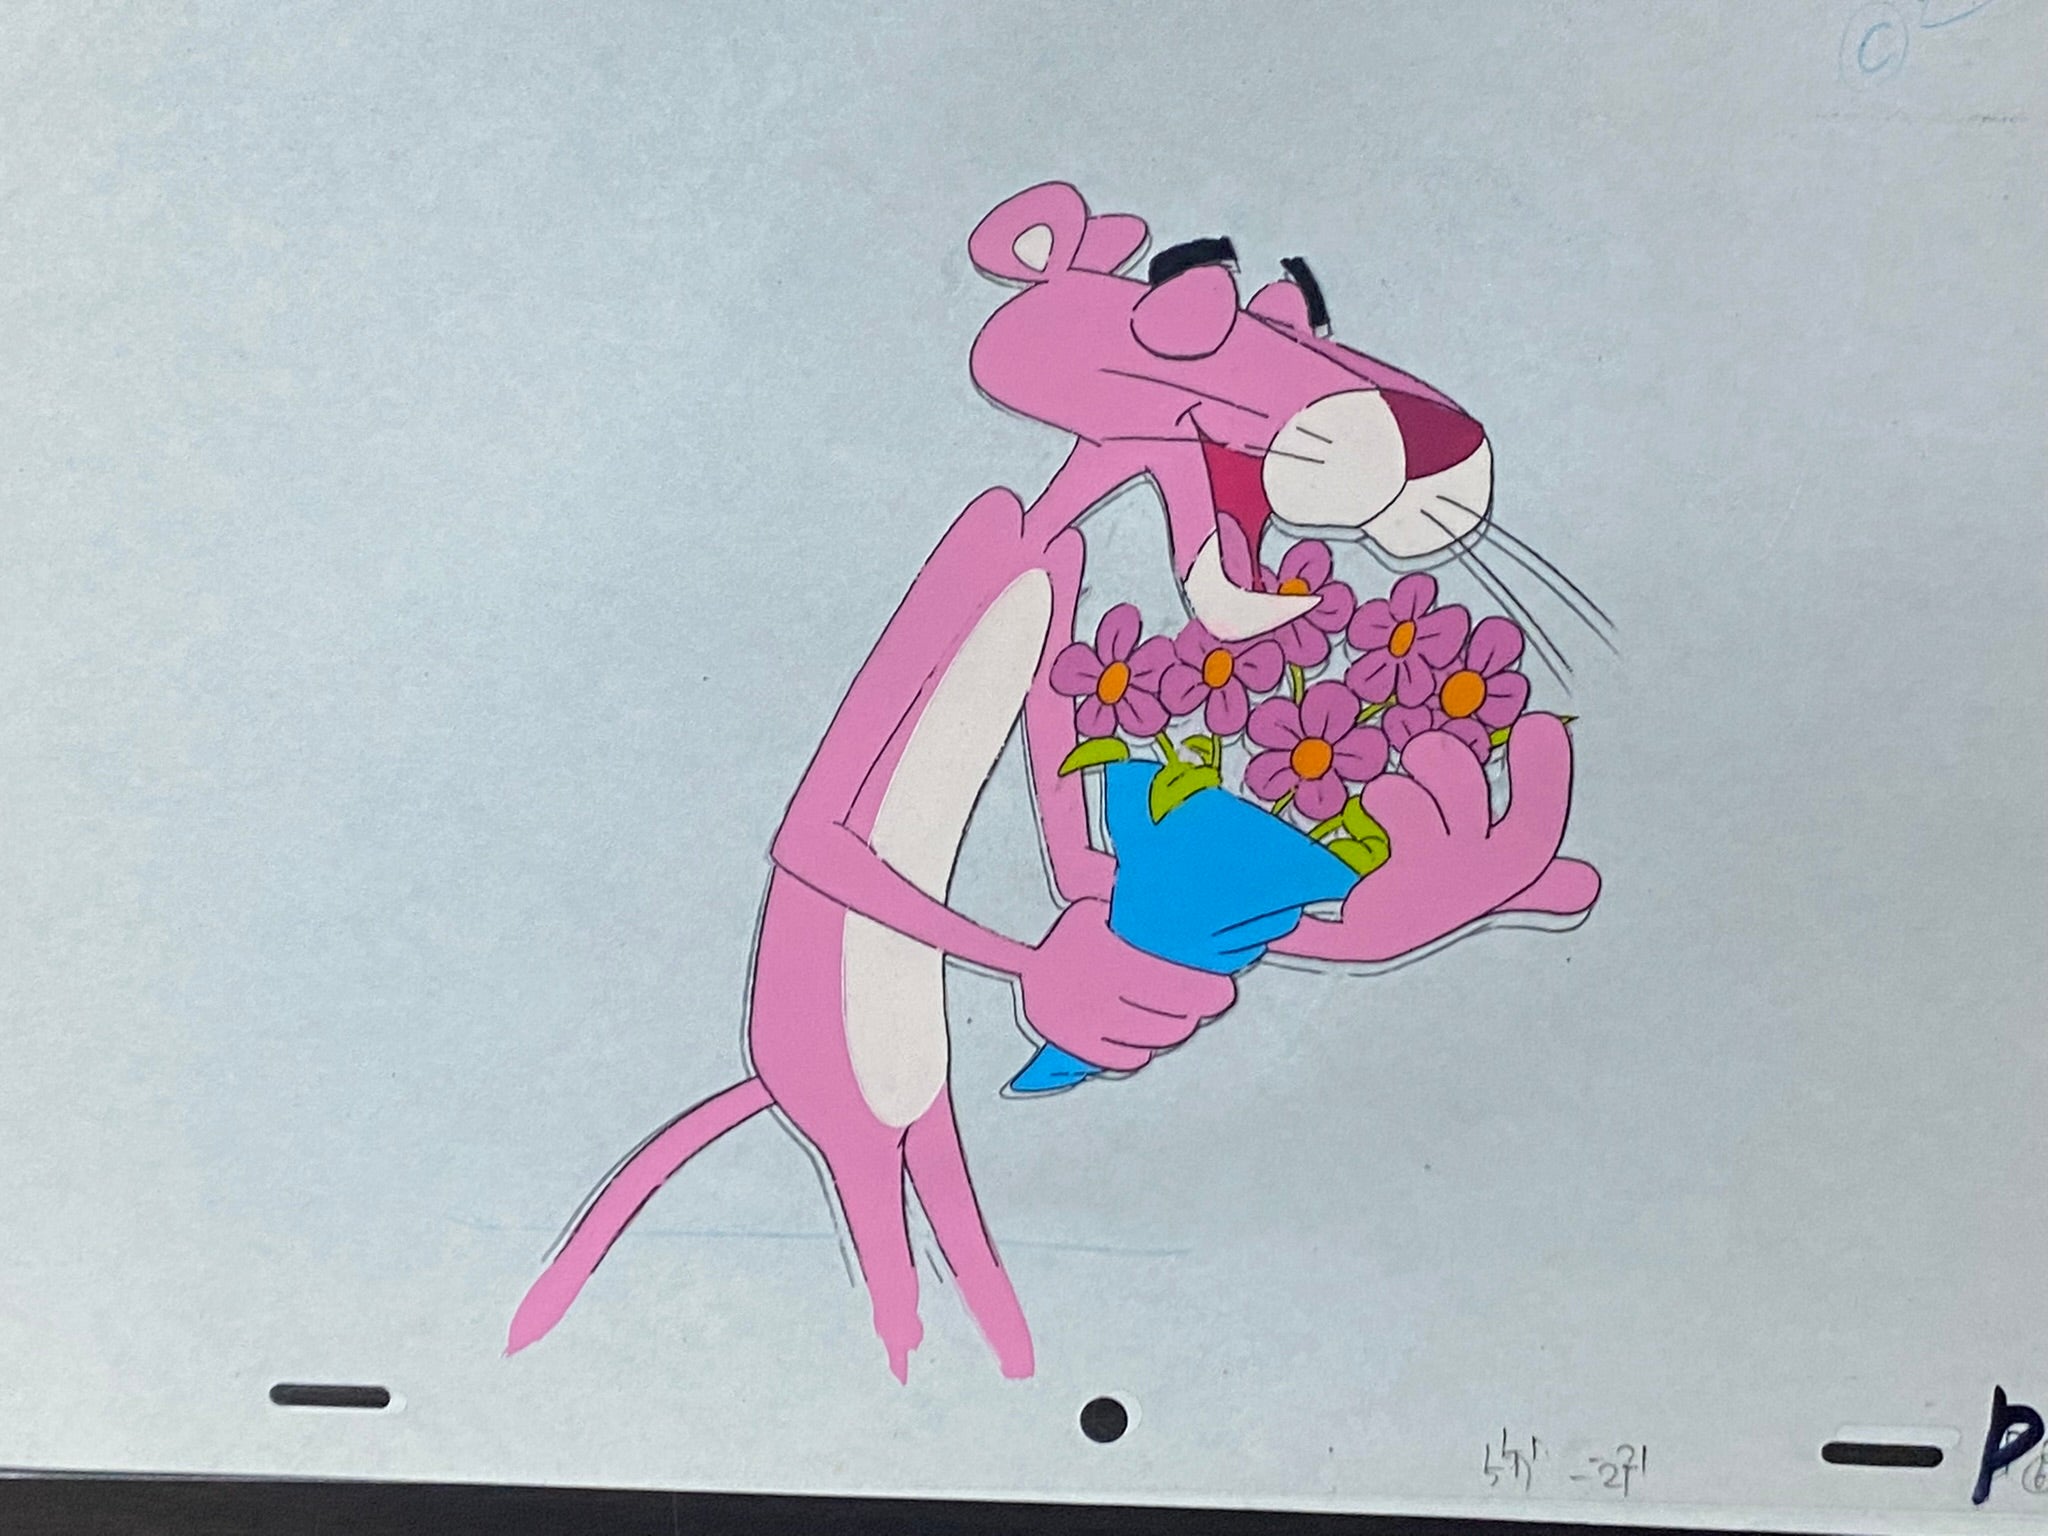 Pink Panther Christmas episode, original animation cel and drawing